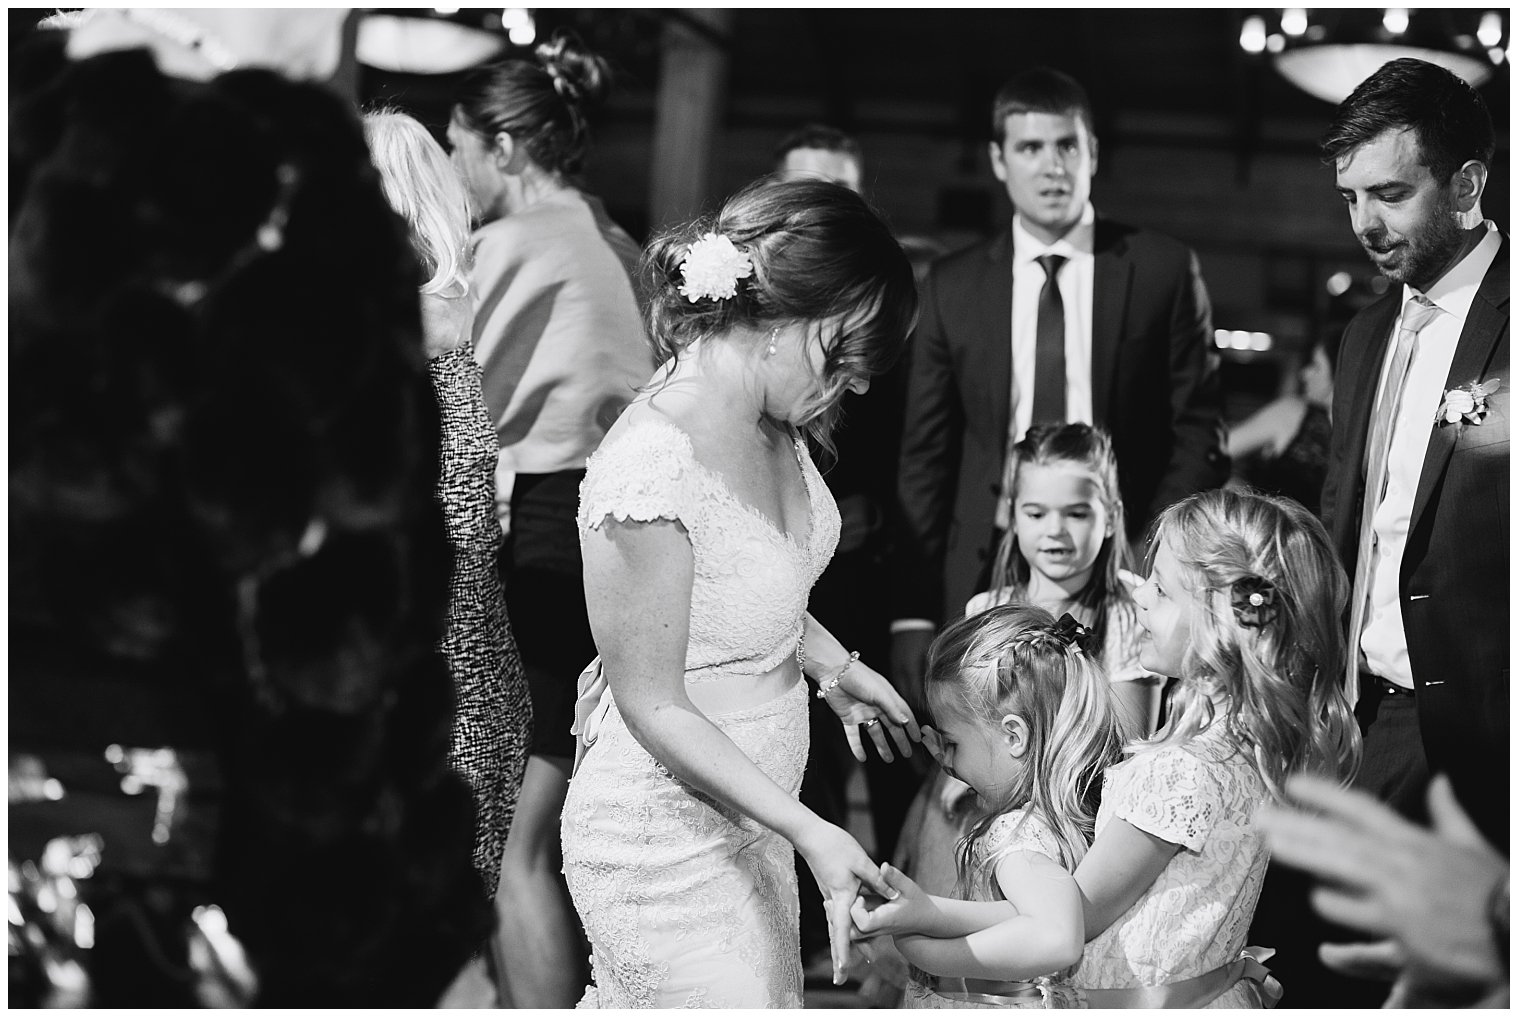 The bride dances with her flower girls at her Copper Mountain wedding reception.